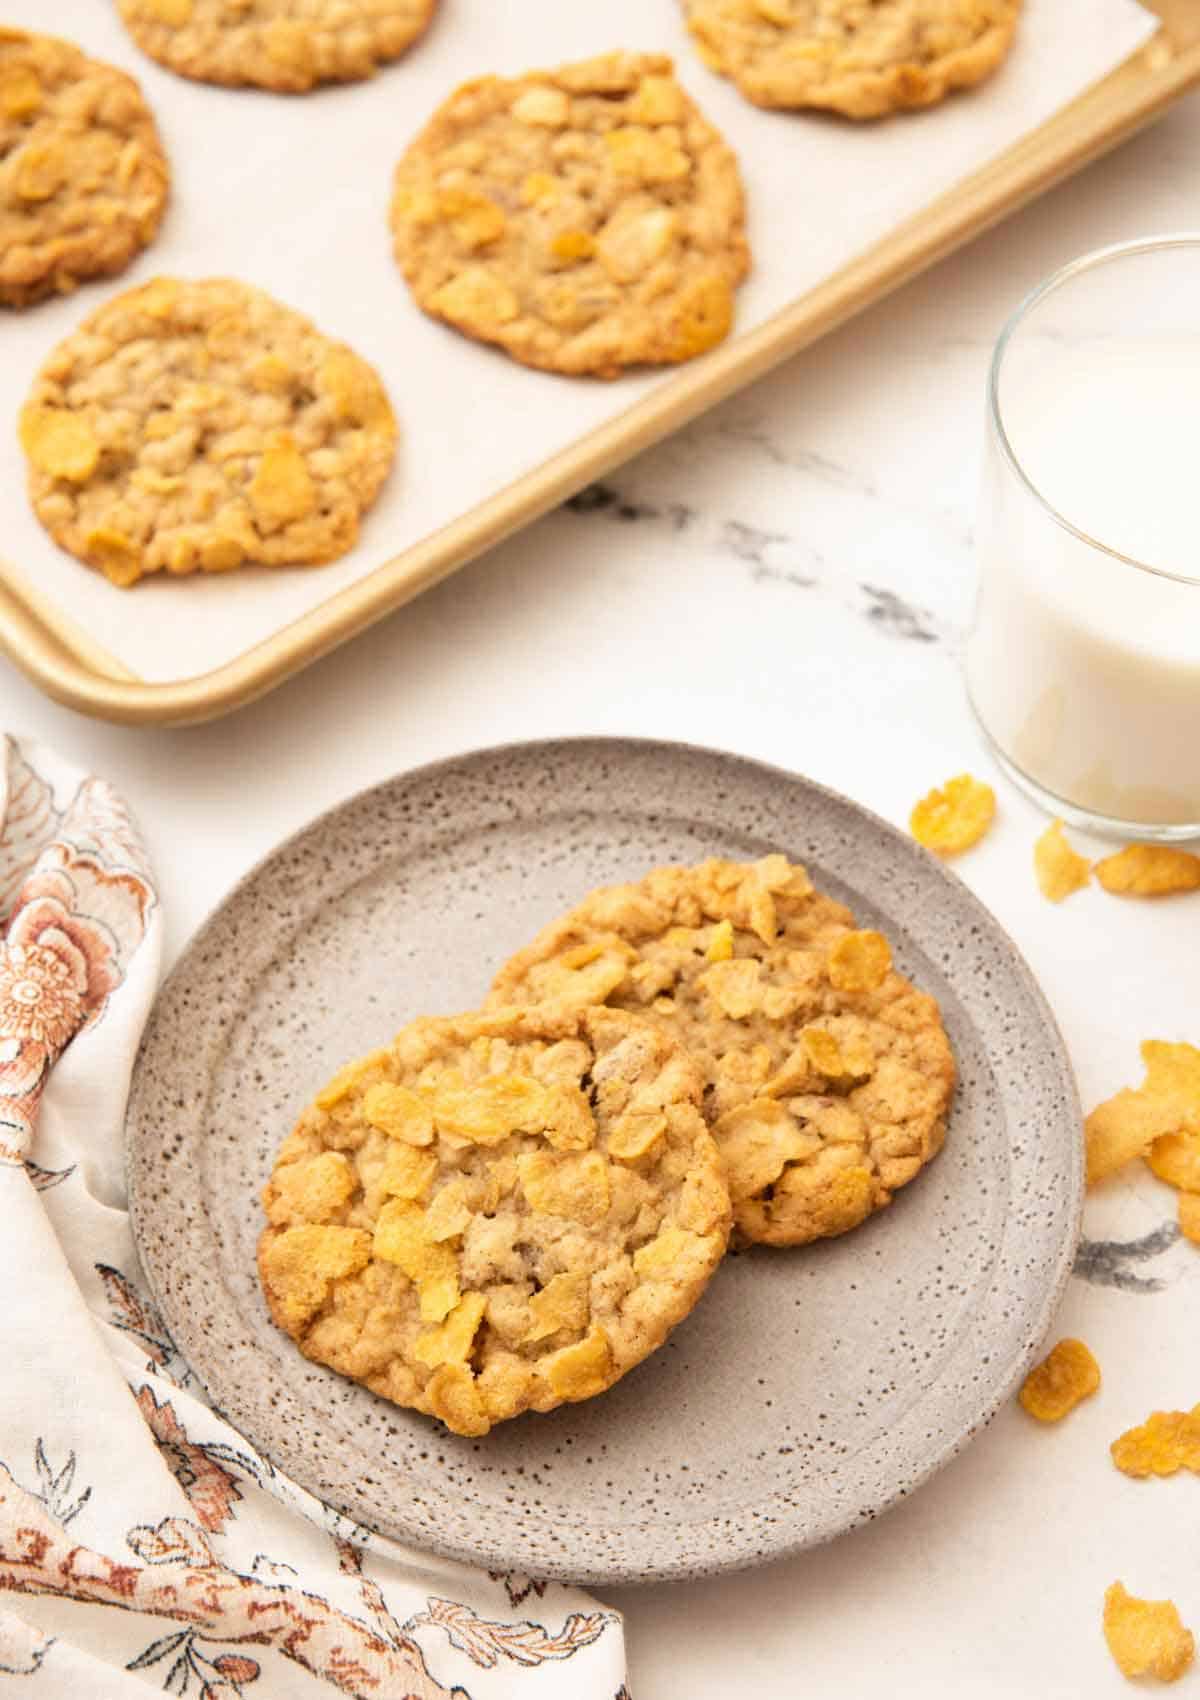 A plate with two cornflake cookies with a sheet pan with more and a glass of milk behind the plate.